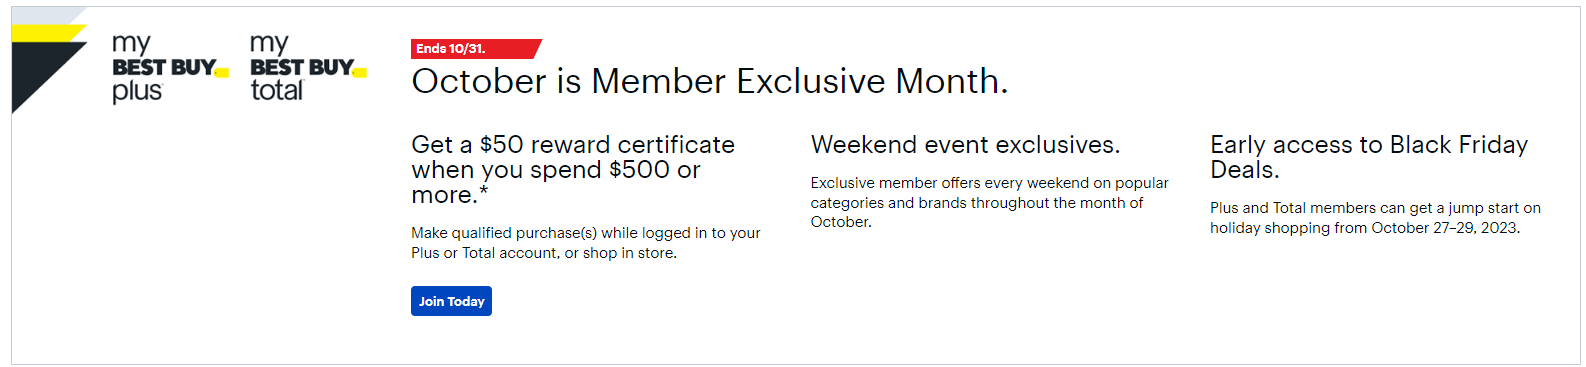 My Best Buy Plus/Total Members: Spend $500+ on Qualifying Products, Get